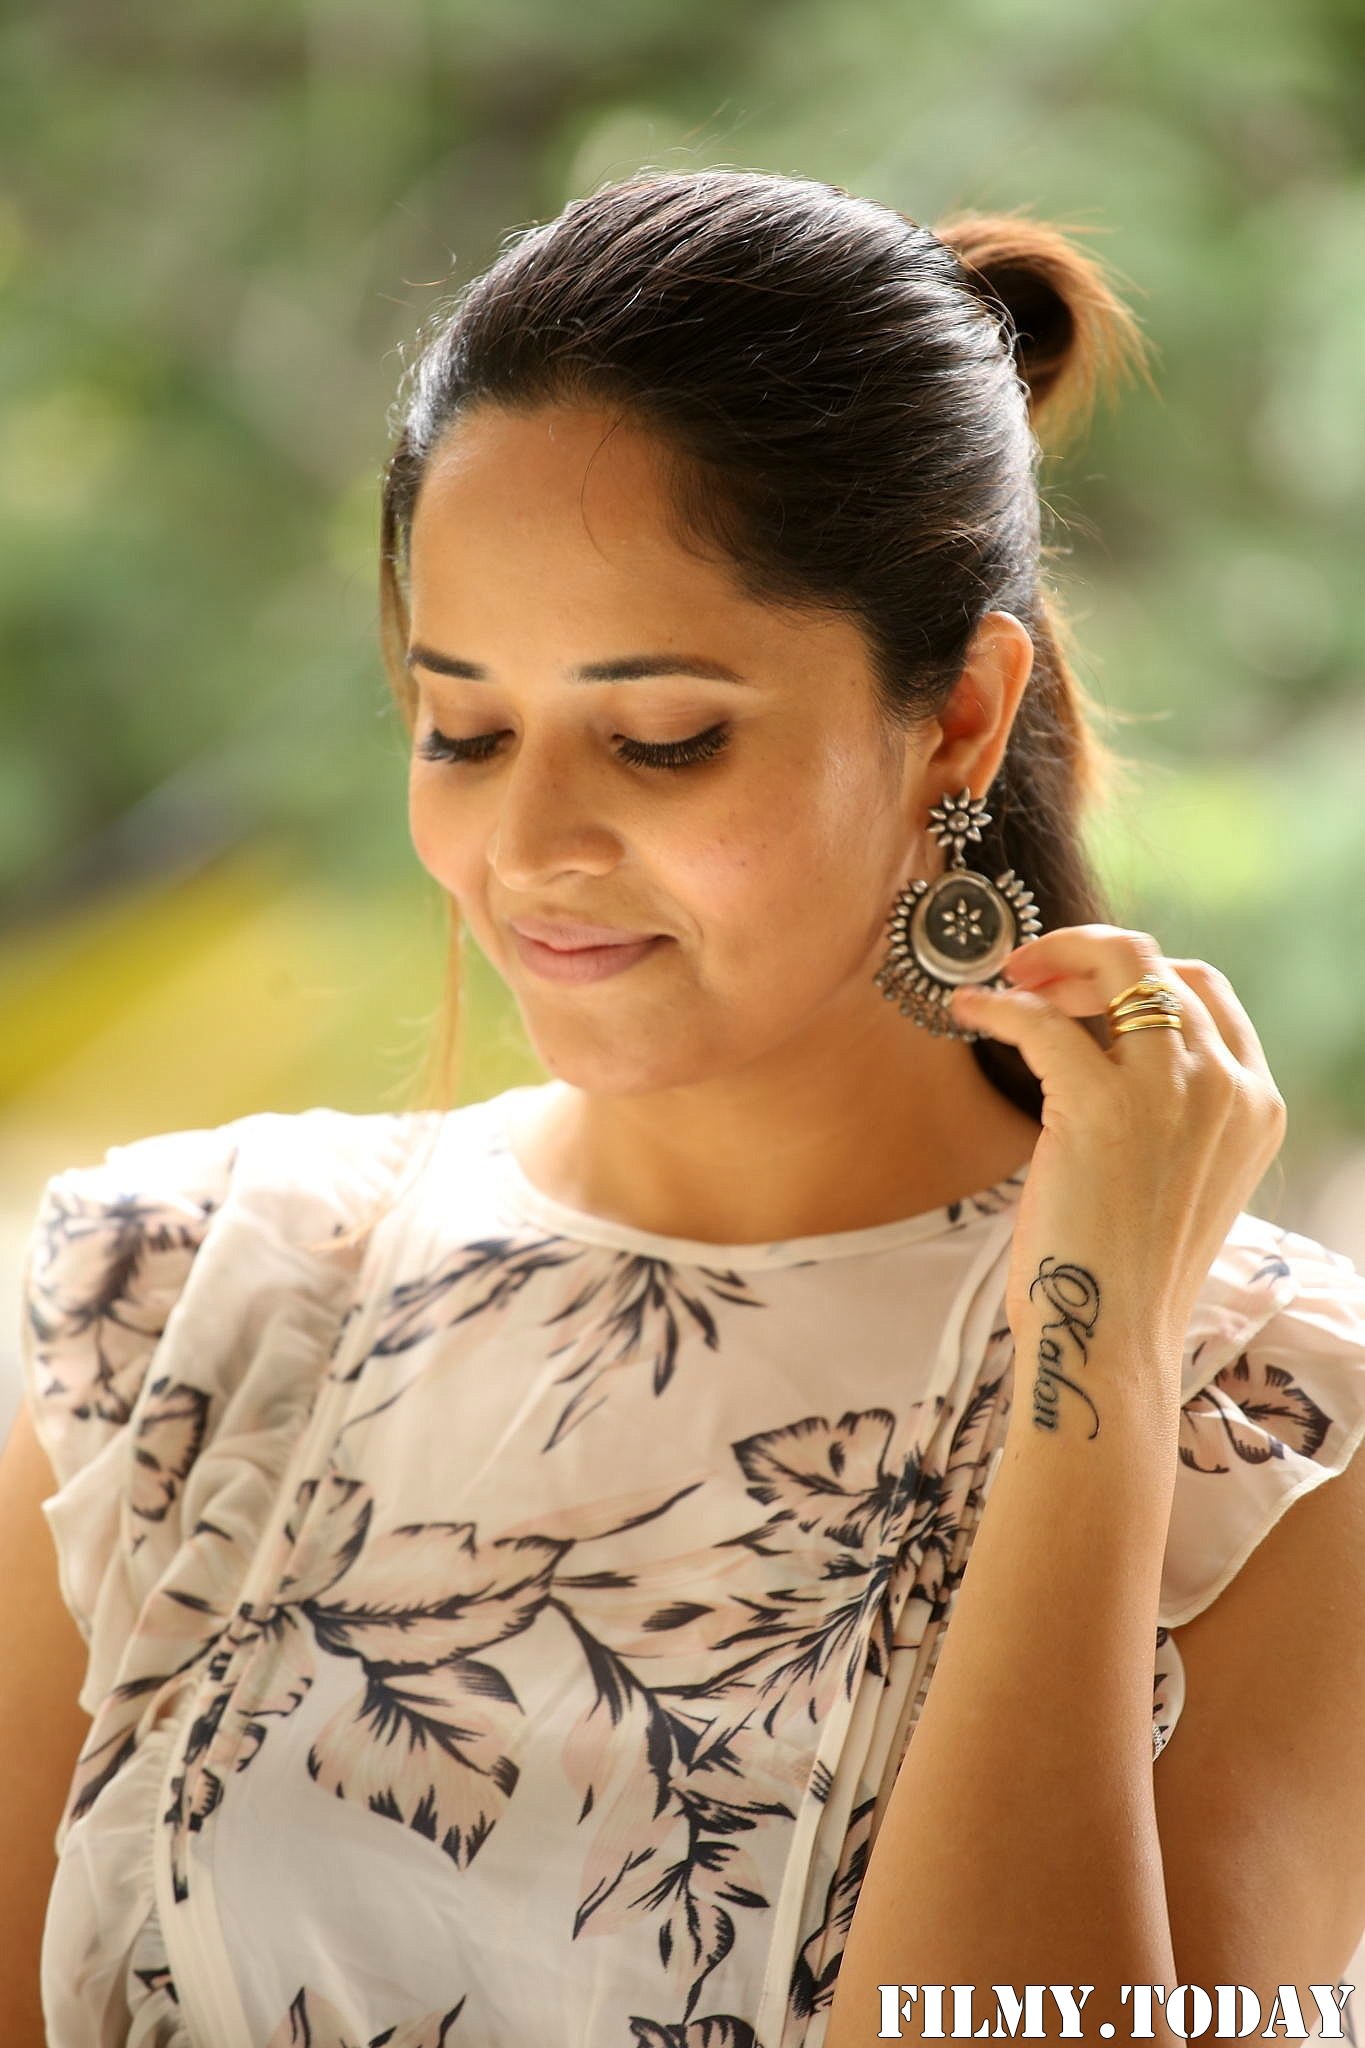 Interview With Kathanam Actress Anasuya Photos | Picture 1673732